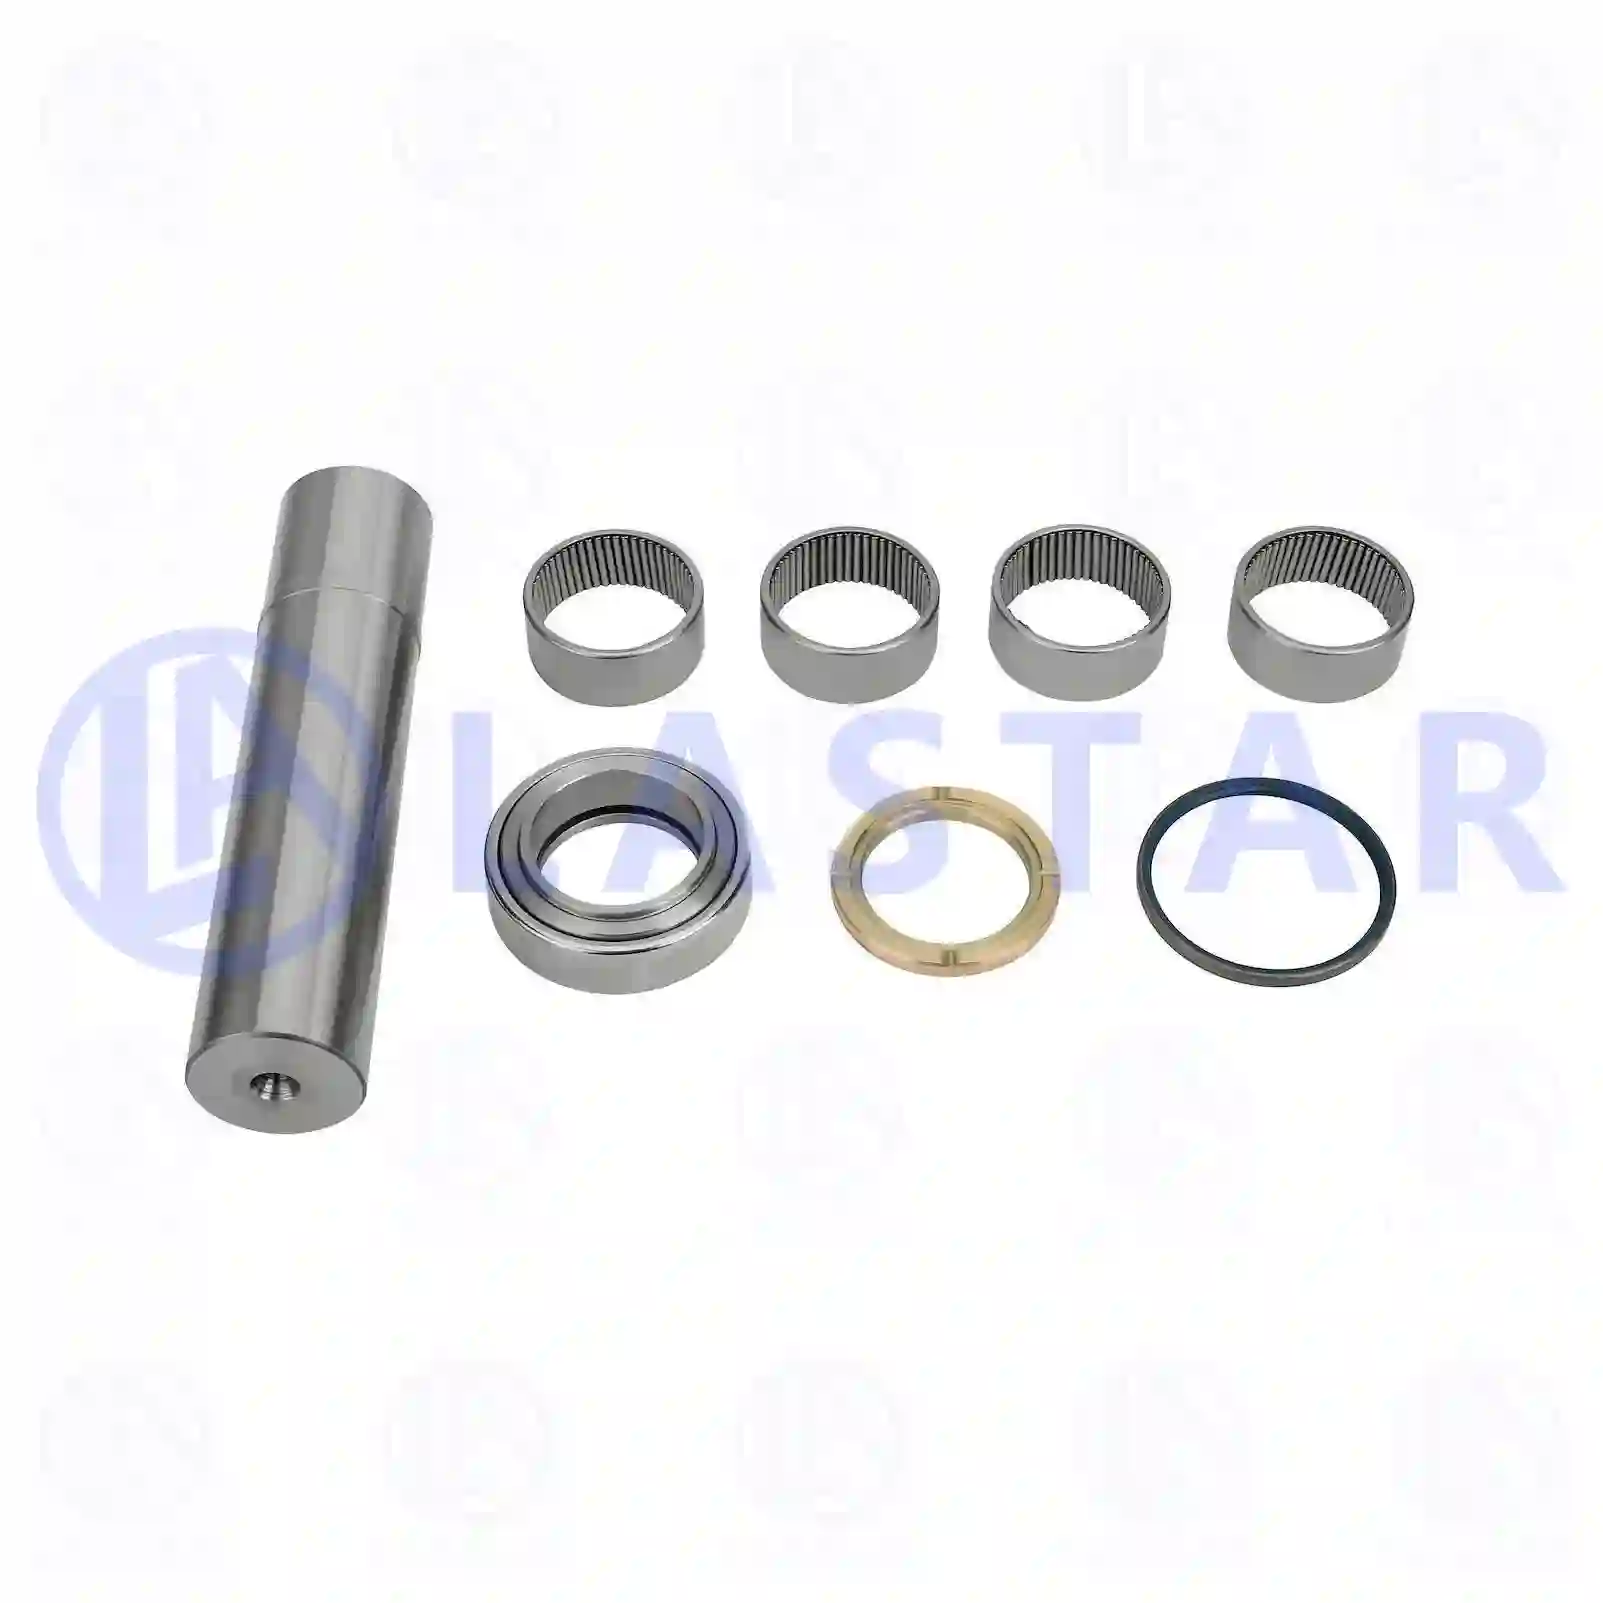 King pin kit, 77731001, 6553300519S1, ||  77731001 Lastar Spare Part | Truck Spare Parts, Auotomotive Spare Parts King pin kit, 77731001, 6553300519S1, ||  77731001 Lastar Spare Part | Truck Spare Parts, Auotomotive Spare Parts